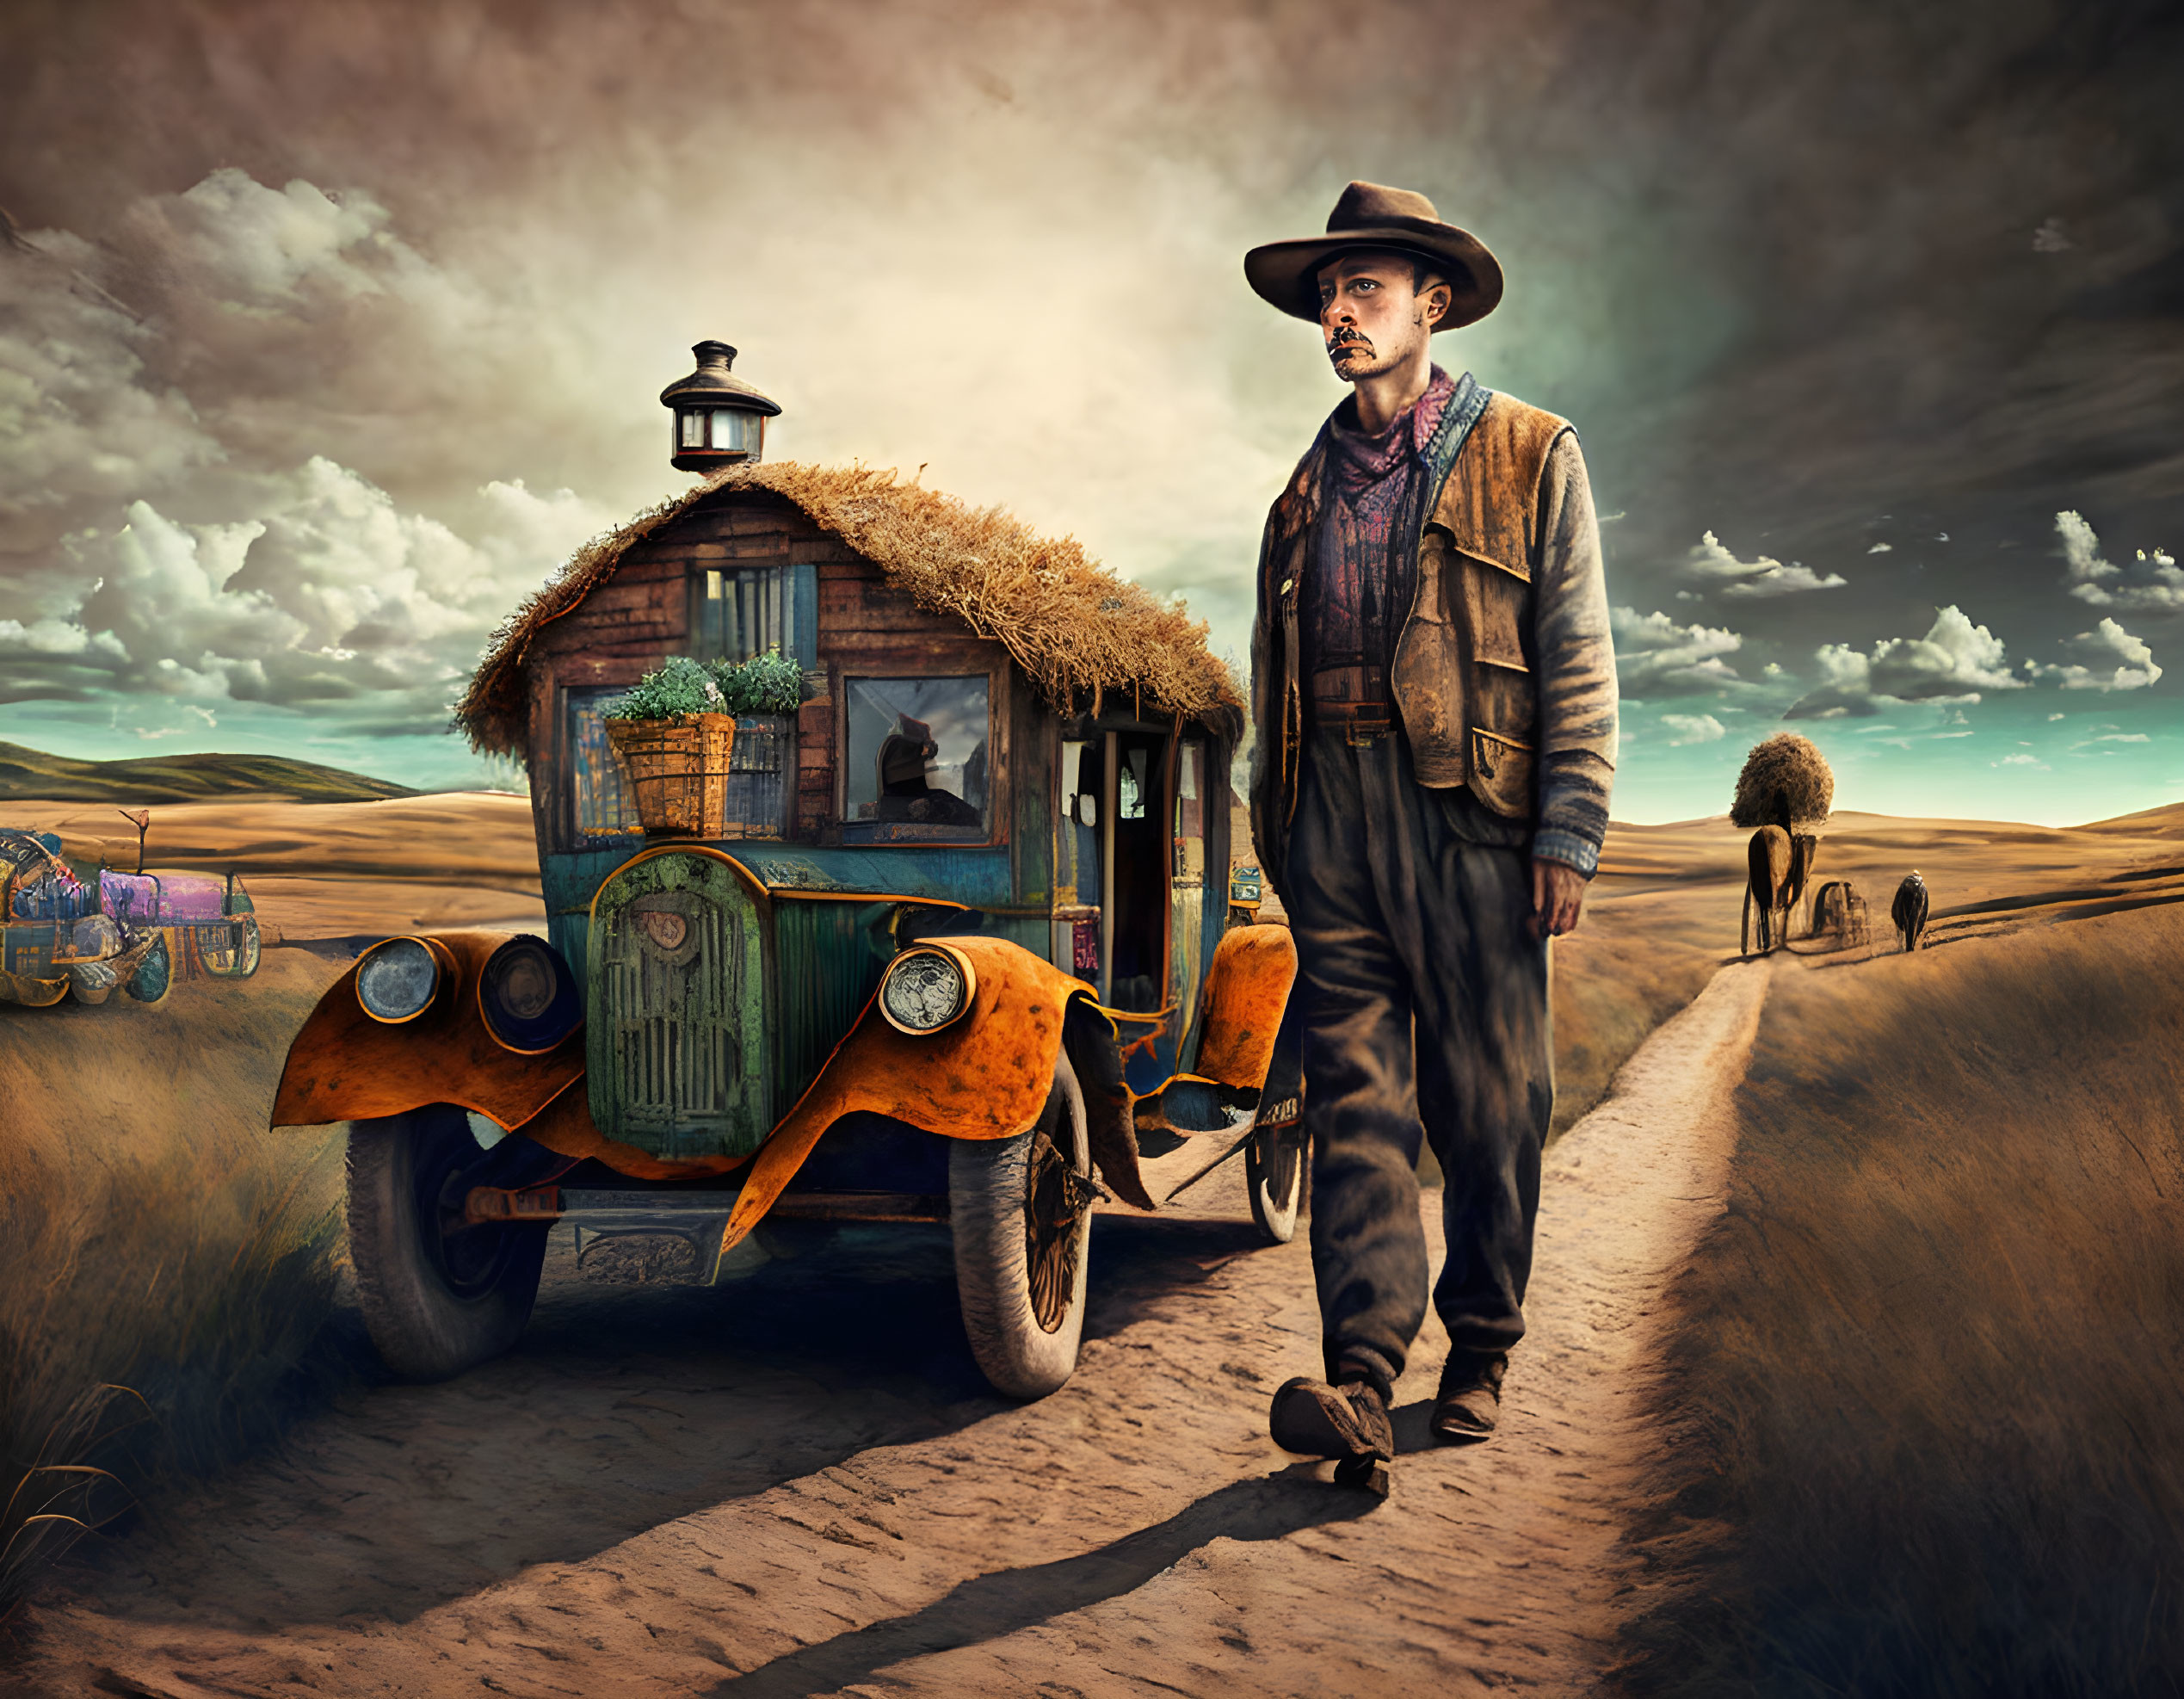 Man in hat and vest next to rustic car on rural dirt road with golden fields and cloudy sky